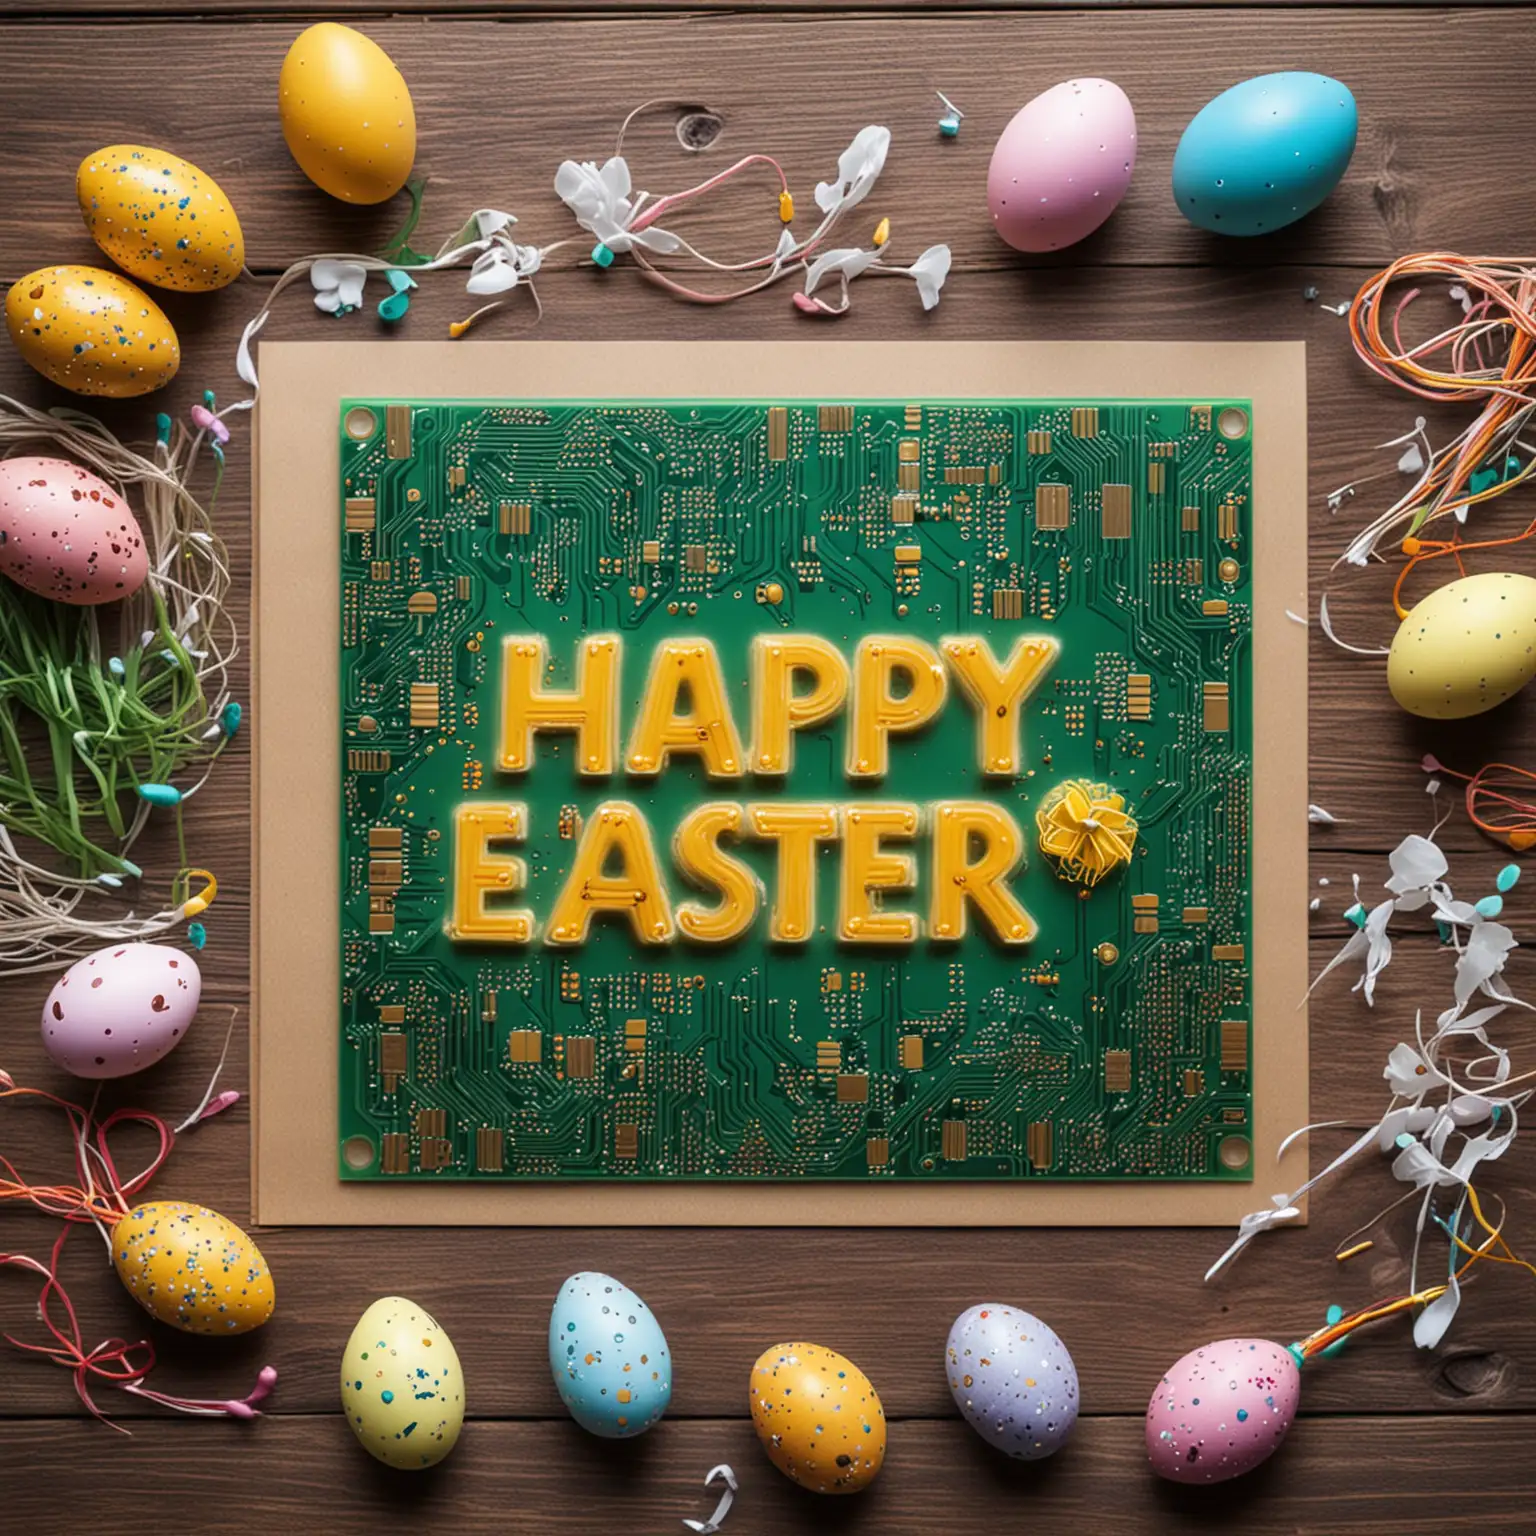 happy easter greetings with printed circuit boards